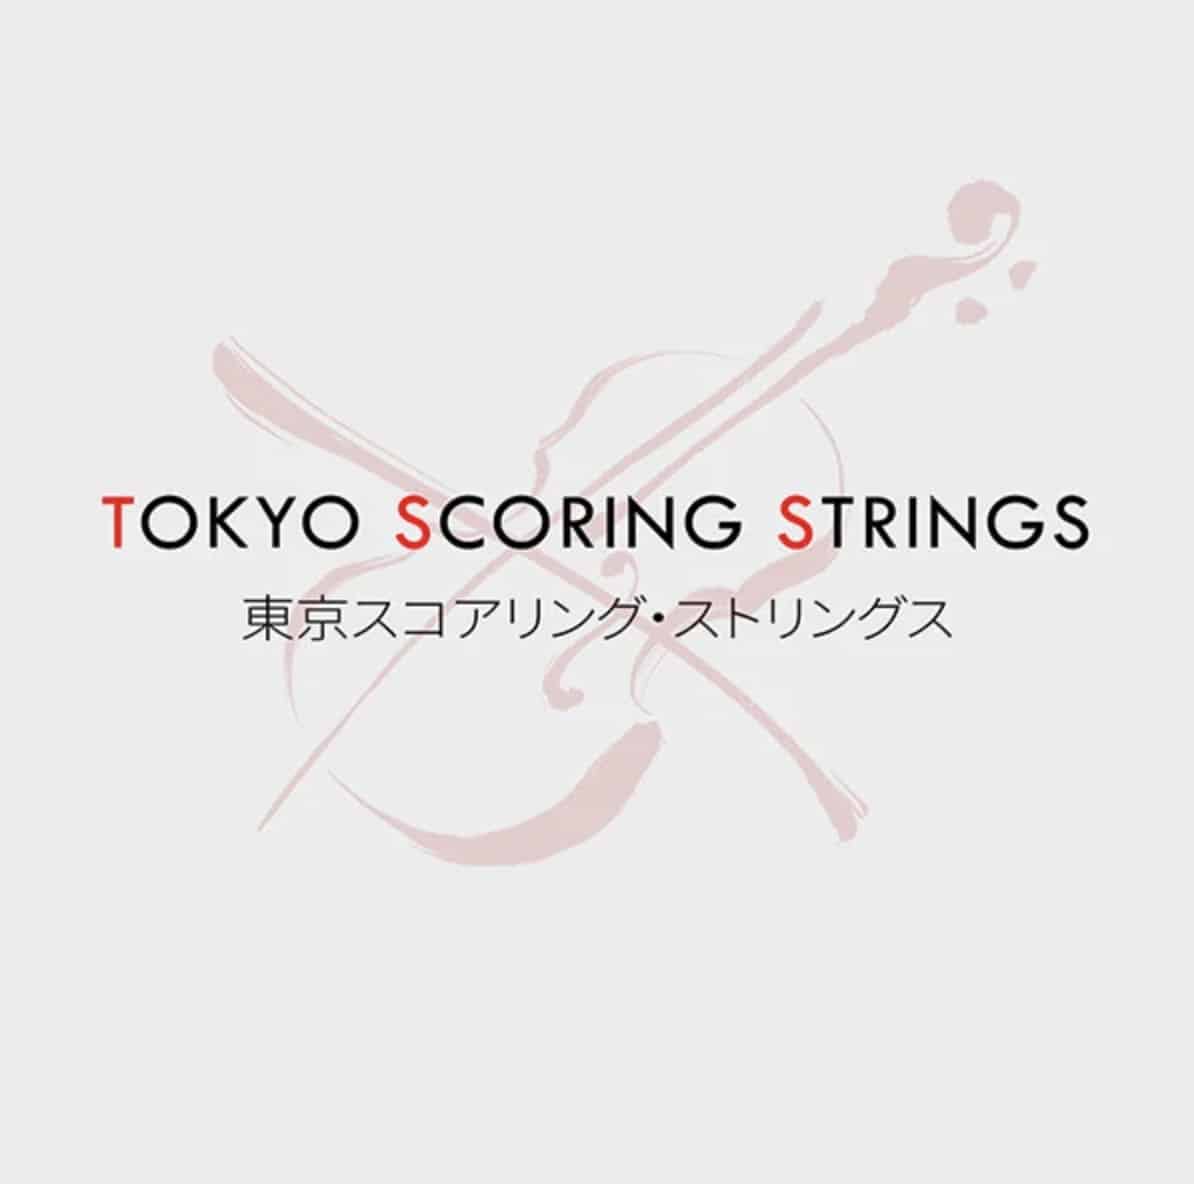 Tokyo Scoring Strings Orchestral String Library for Impact Soundworks Recorded at Sound City